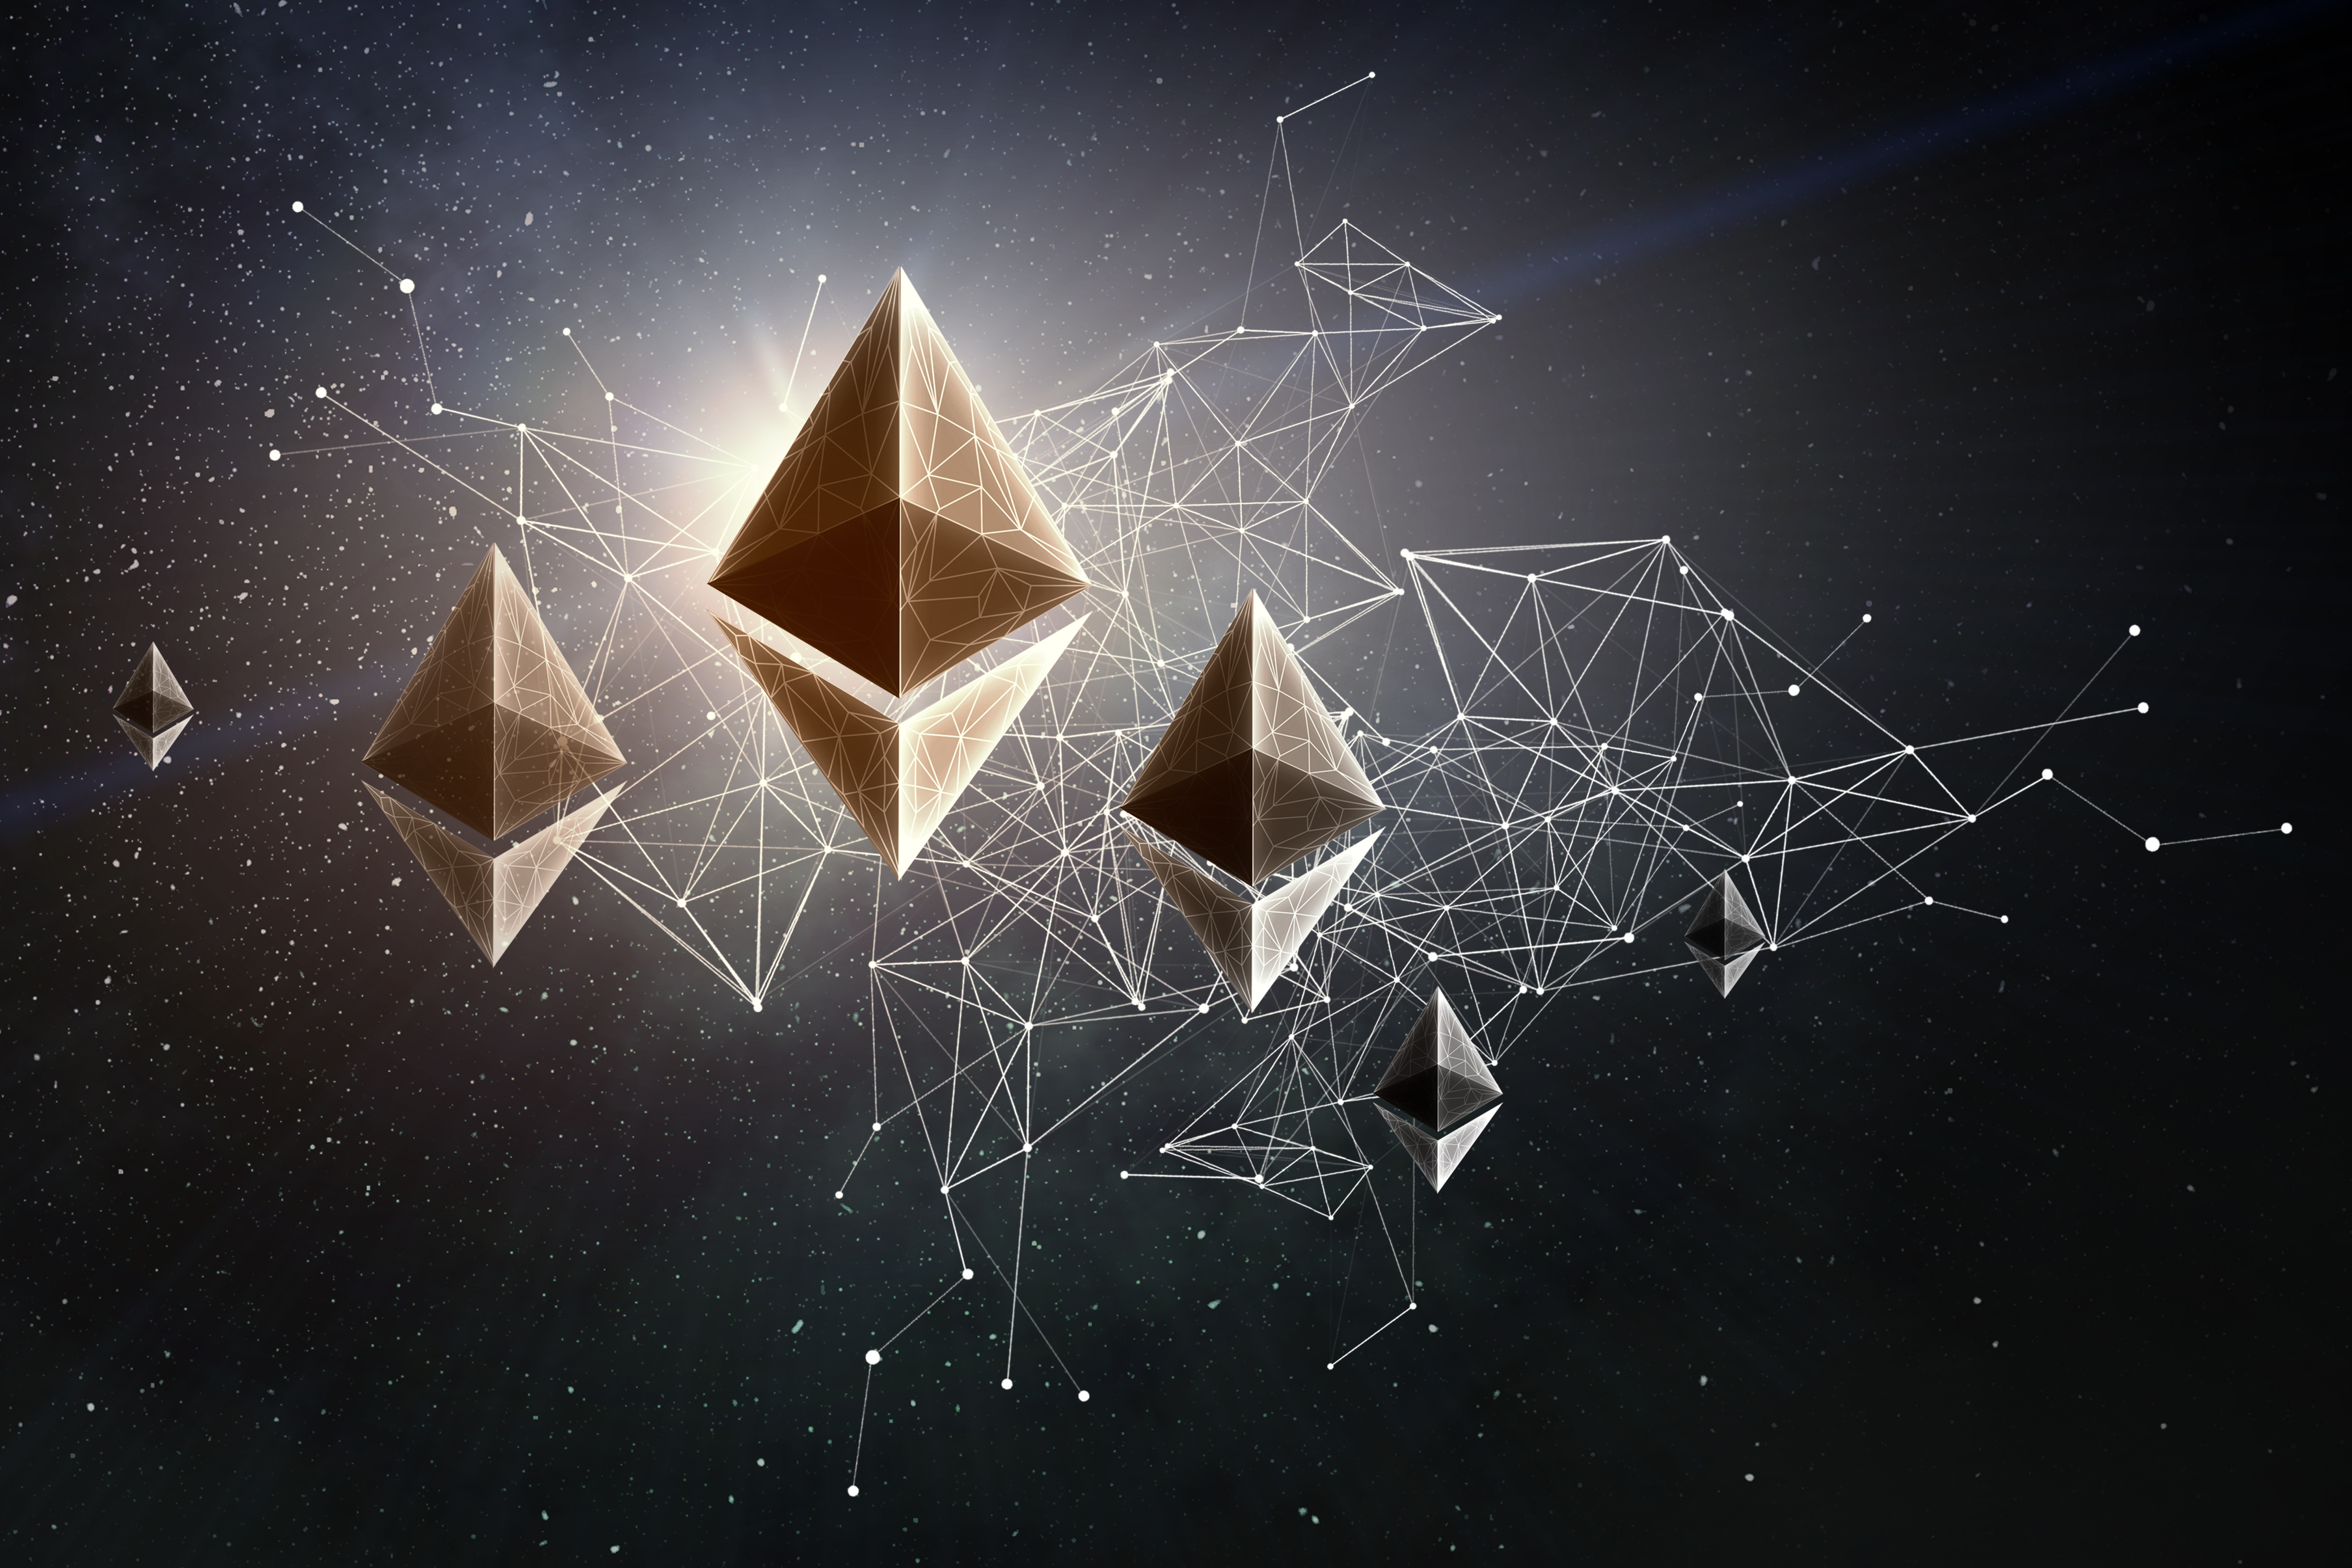 Ethereum Staking Sees Record Weekly Inflows Worth Over $1 Billion – What Next for the Ether (ETH) Price?